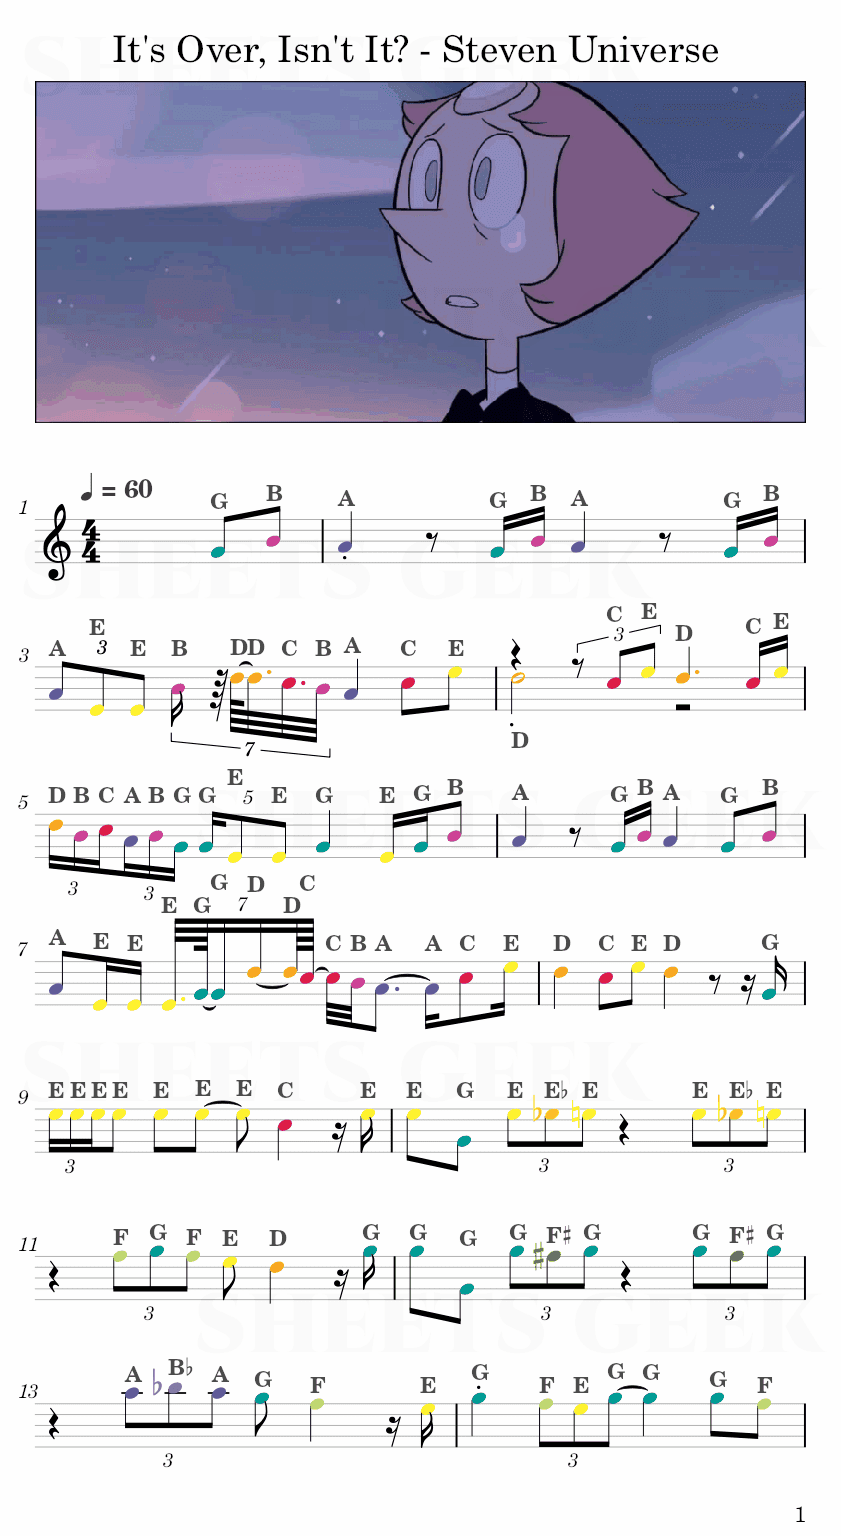 It's Over, Isn't It? - Steven Universe Easy Sheet Music Free for piano, keyboard, flute, violin, sax, cello page 1